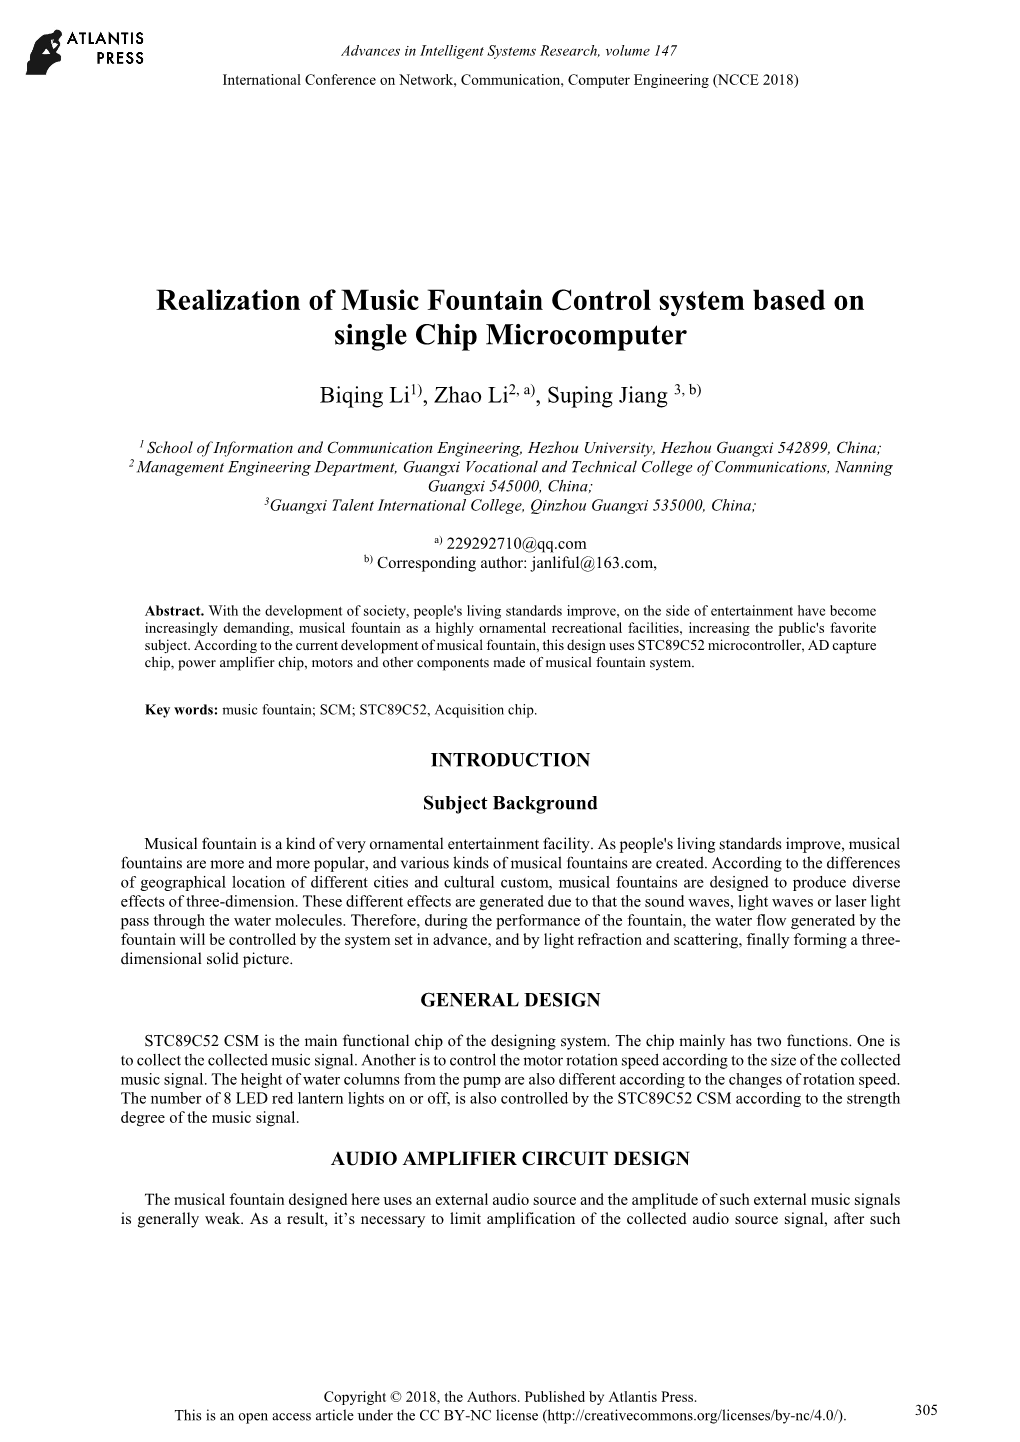 Realization of Music Fountain Control System Based on Single Chip Microcomputer